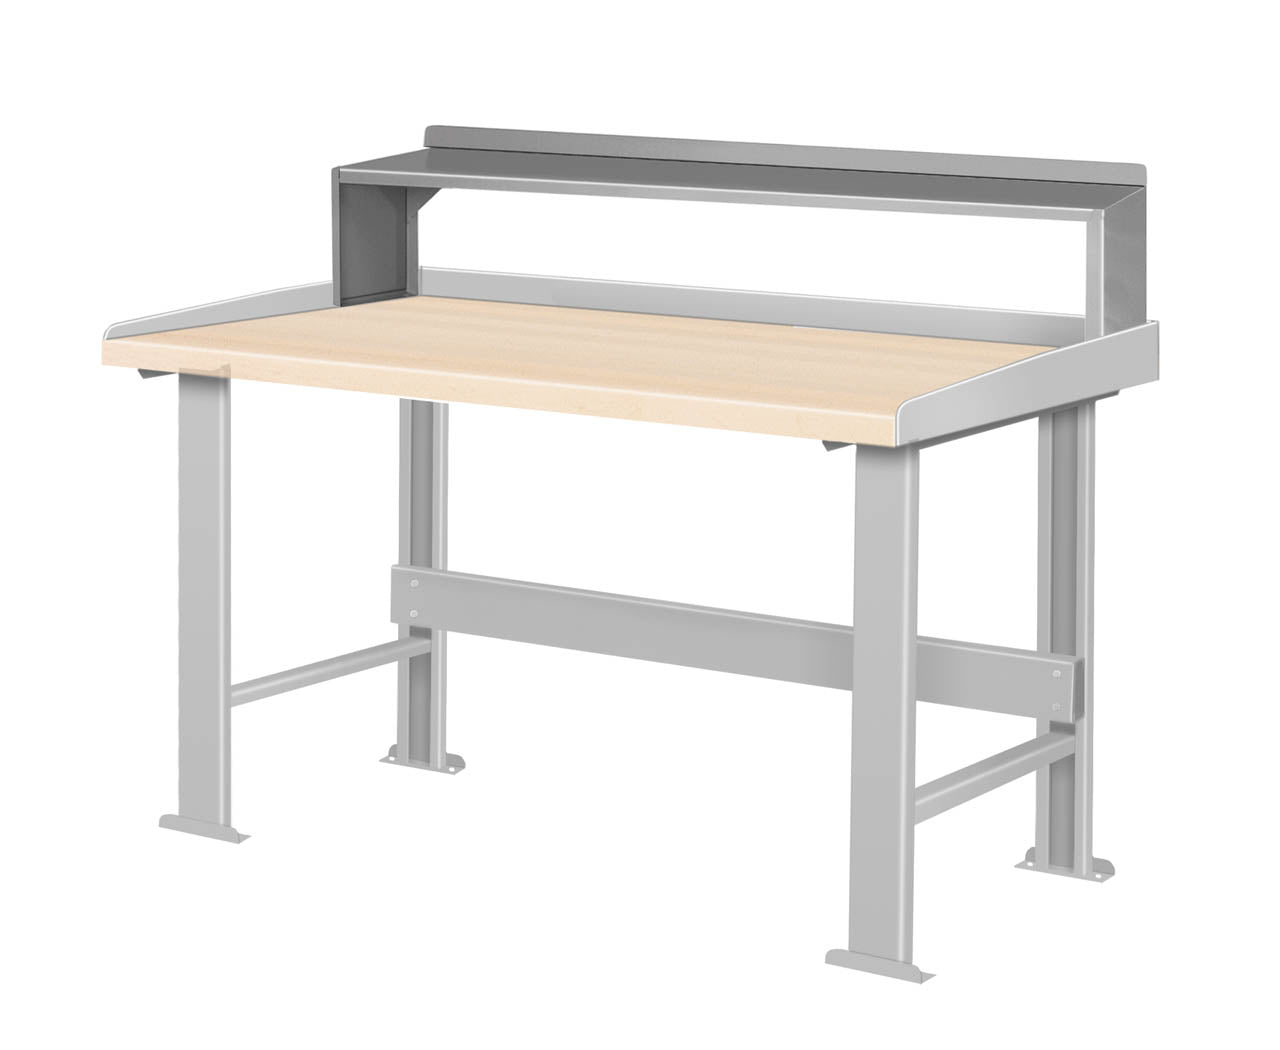 48"W Bench Riser for Pucel Work Benches